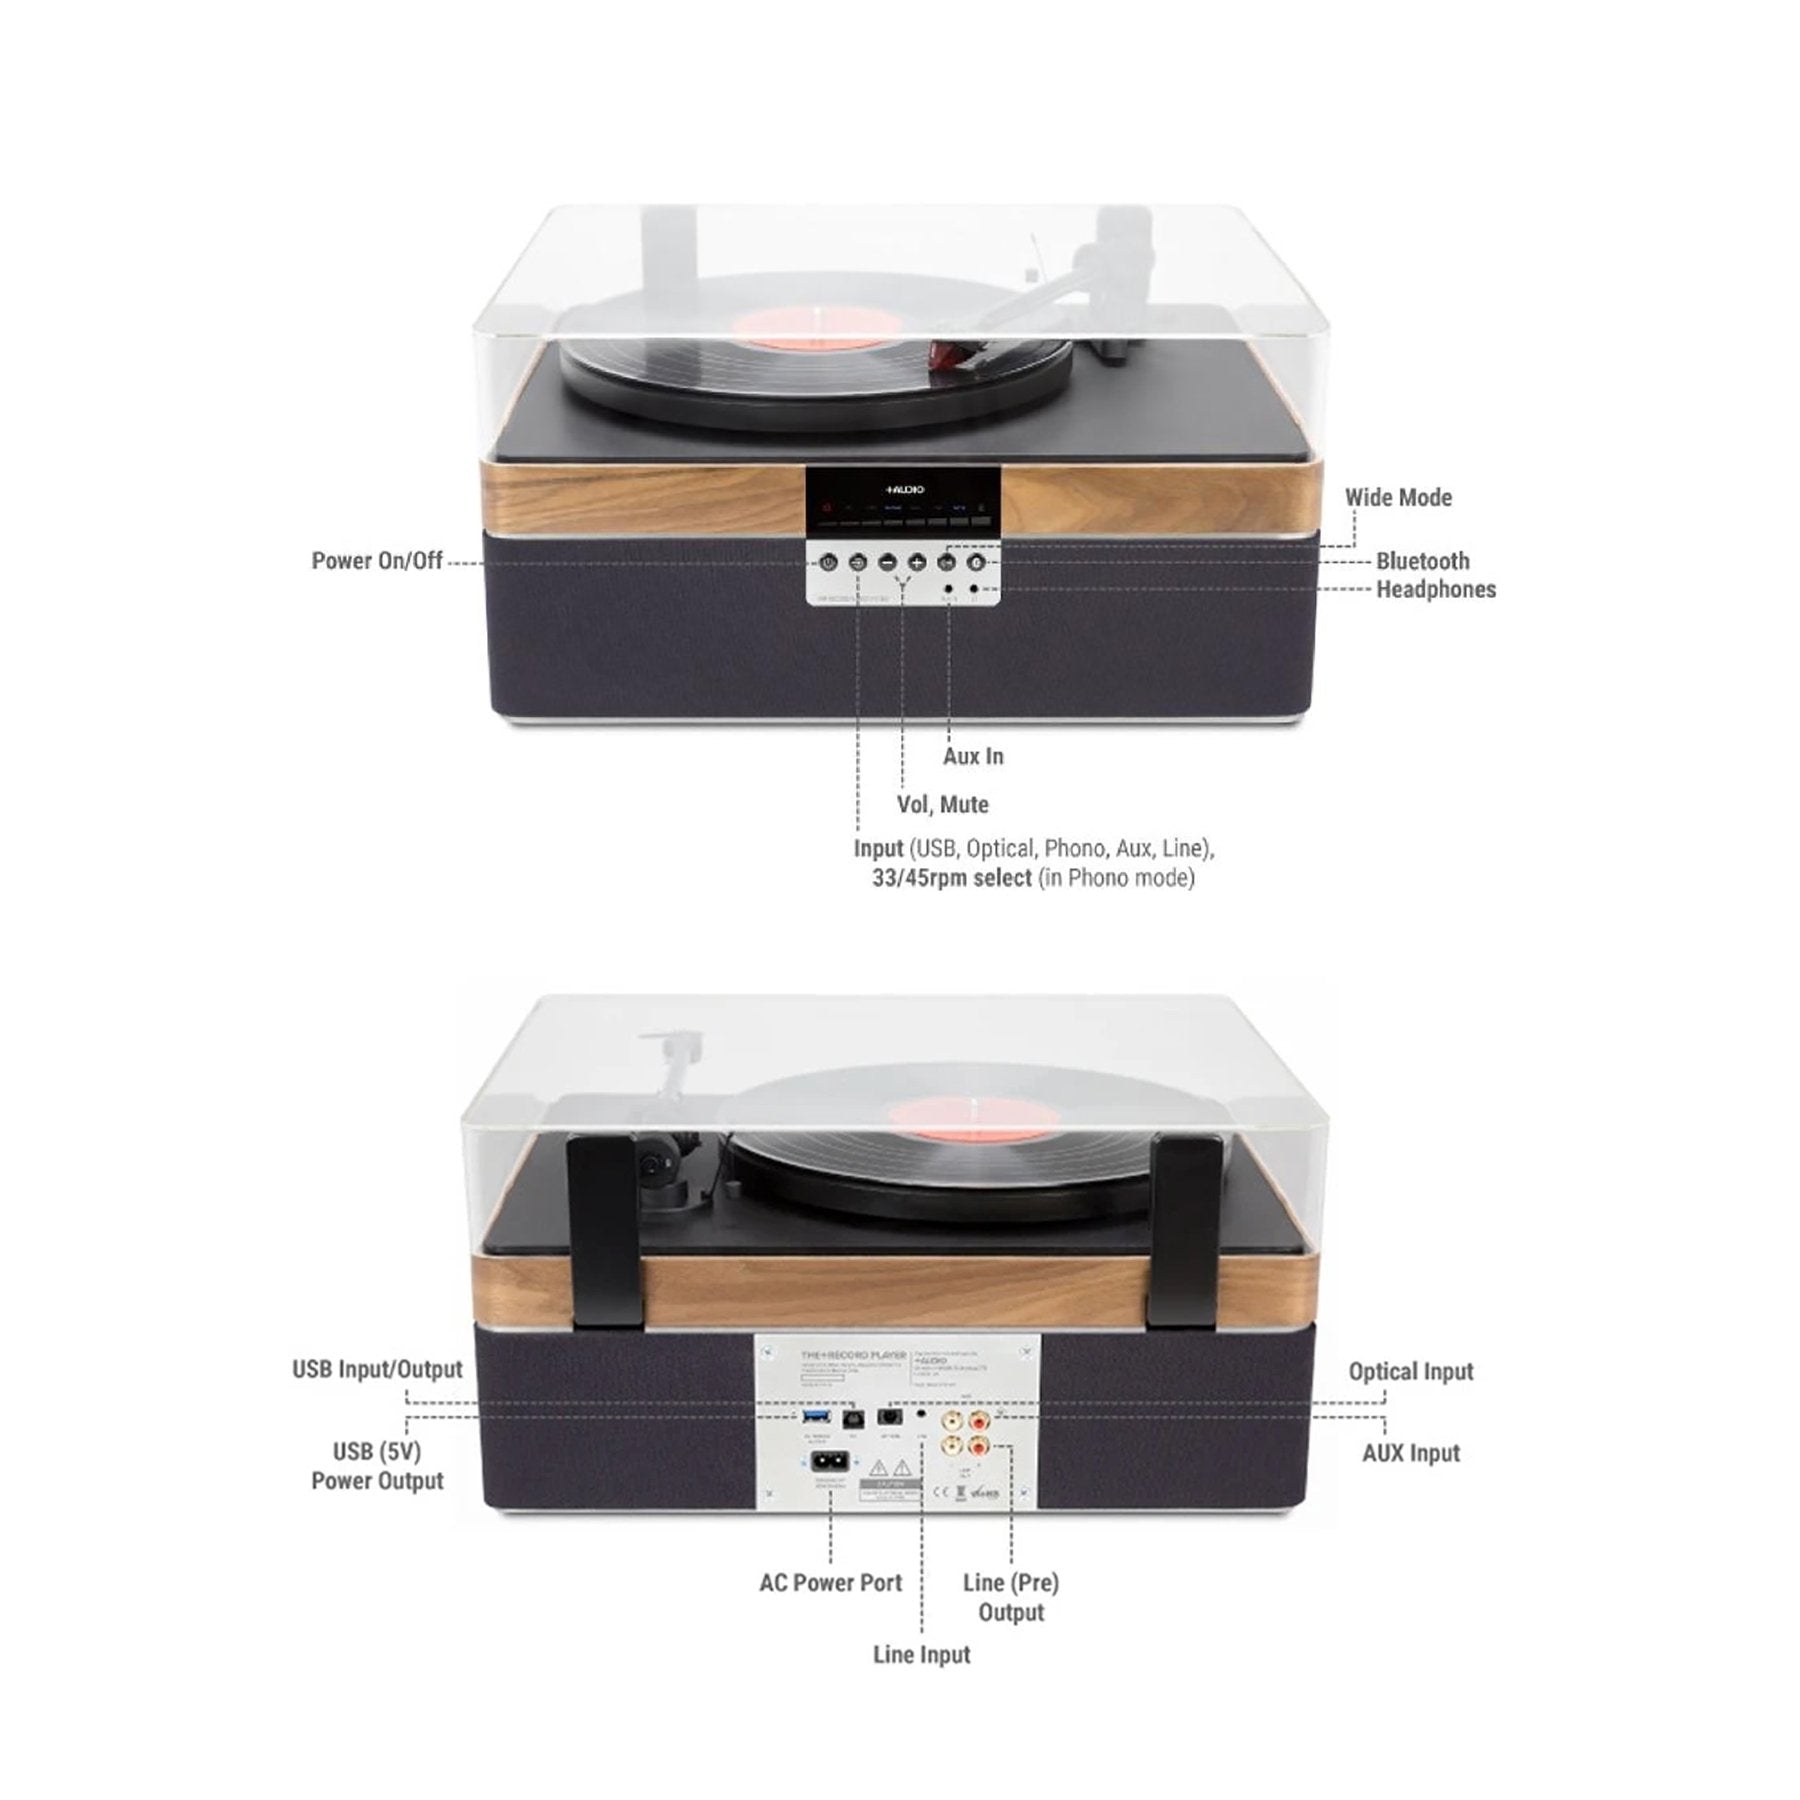 Plus Audio: The +Record Player Turntable + Integrated Audio System w/Bluetooth - Walnut